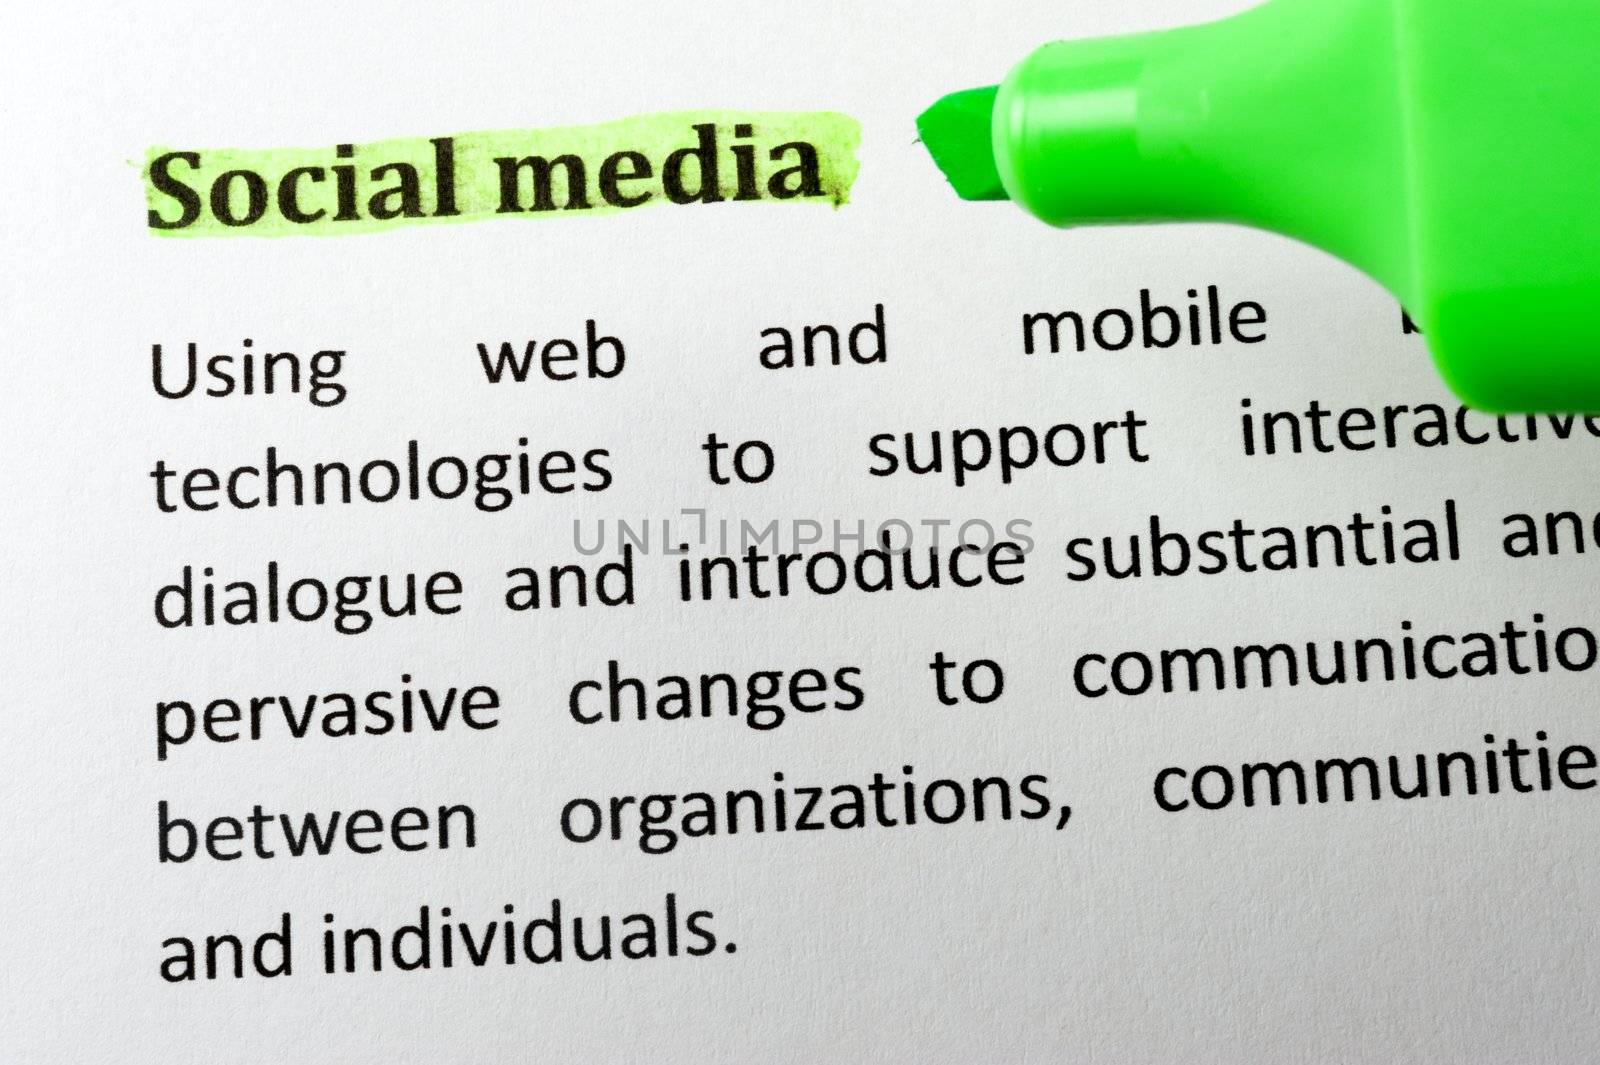 Social media item on paper with a highlighter